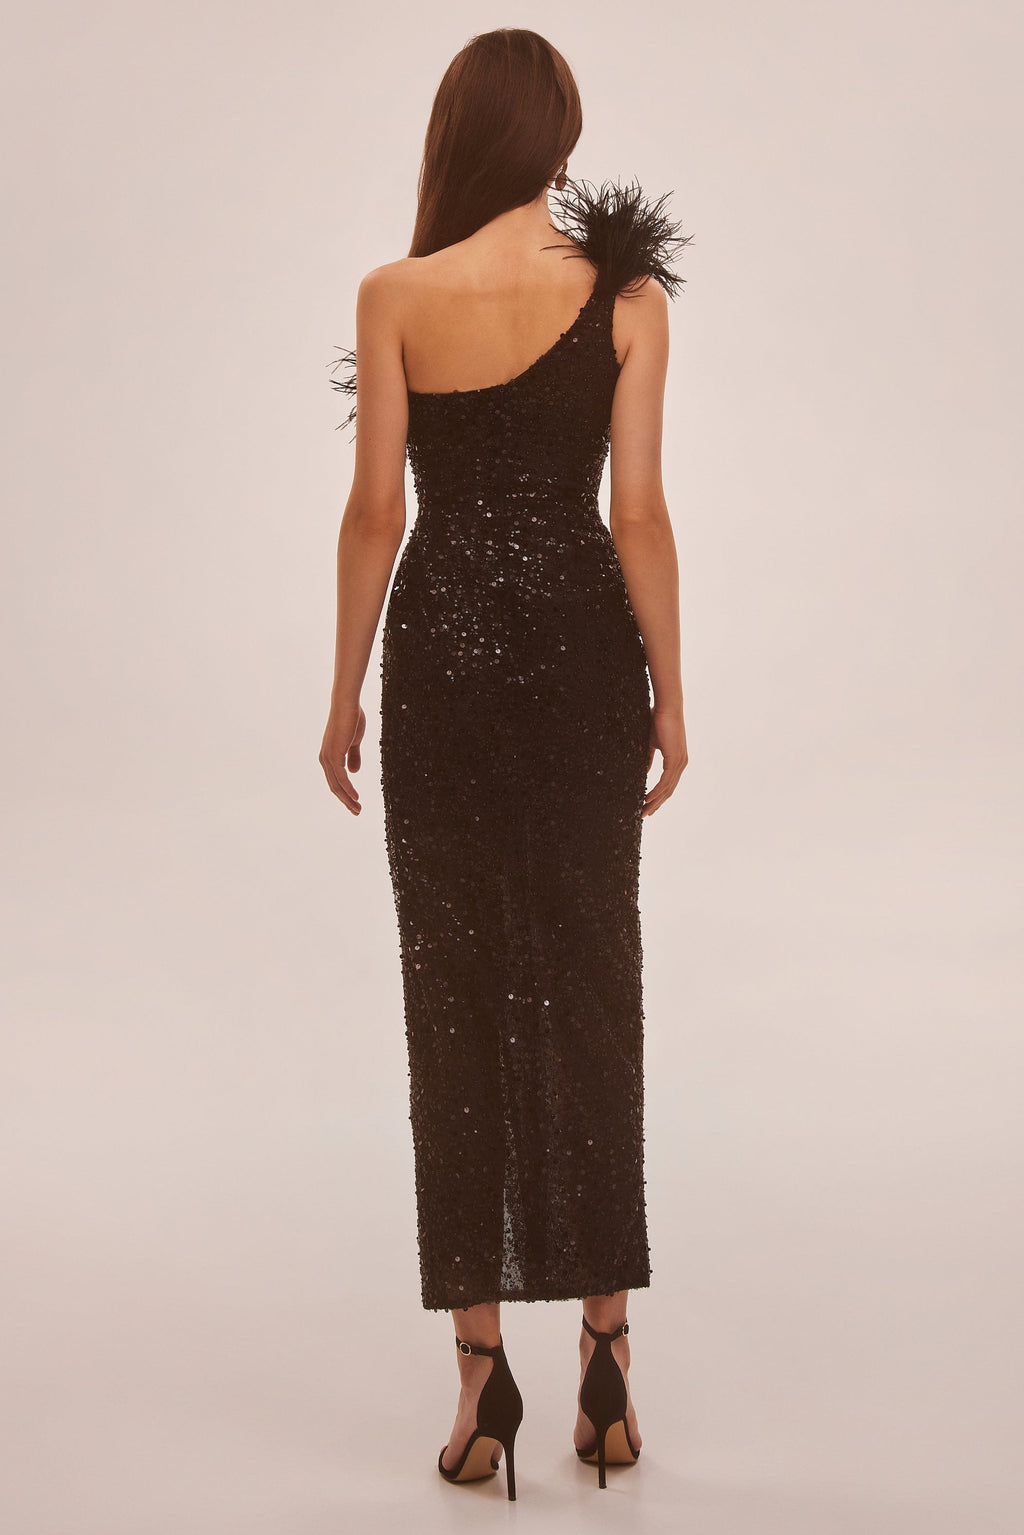 Striking one-shoulder maxi dress with feathers and sequins